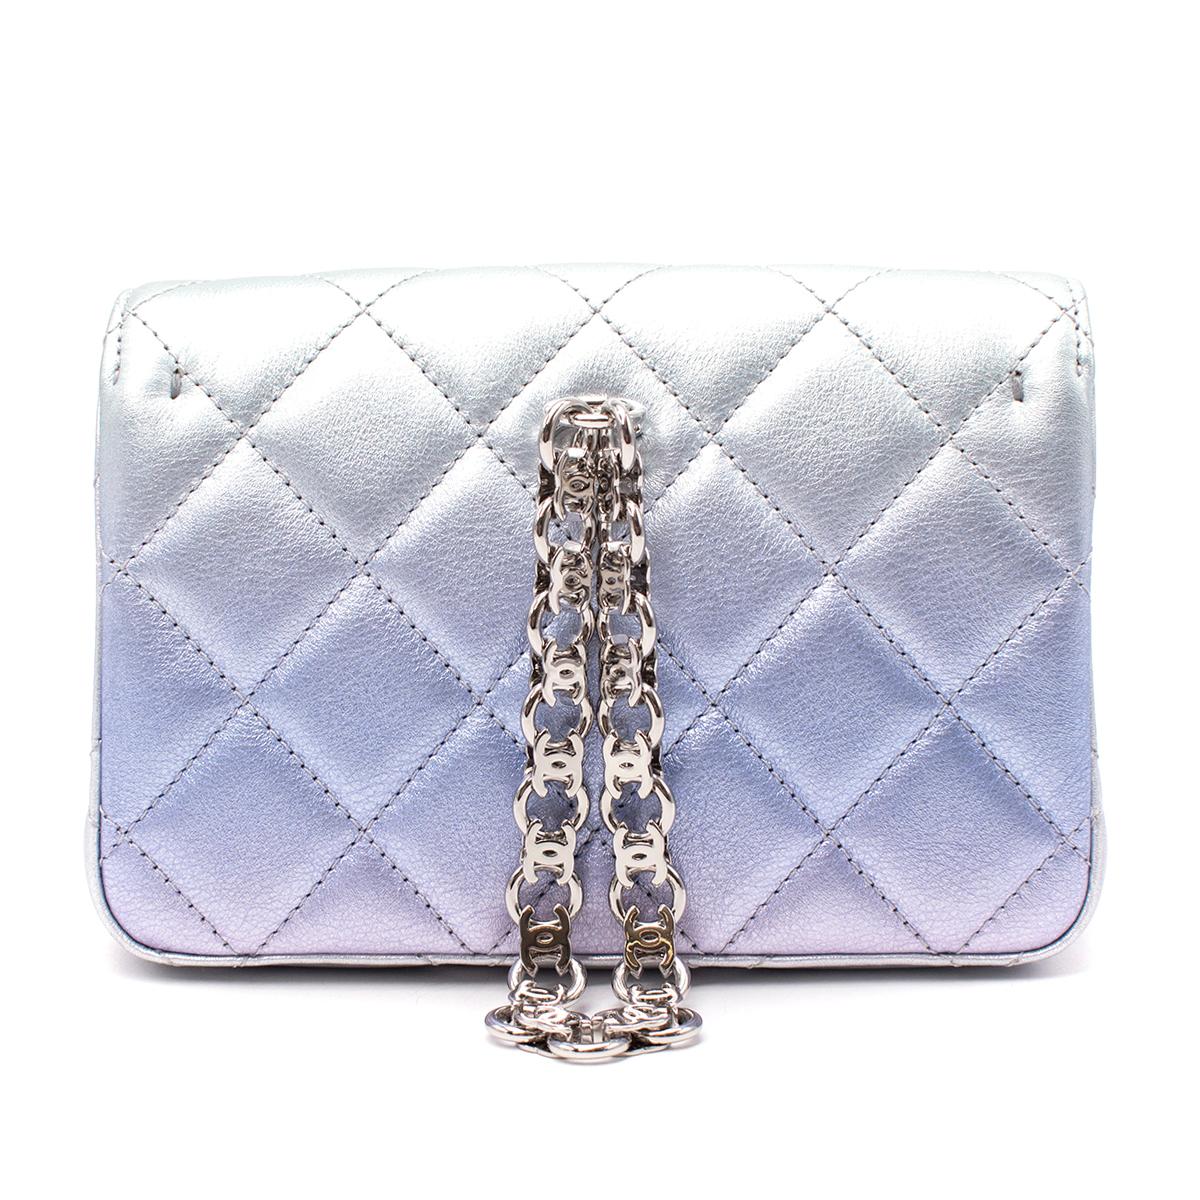 Chanel Lilac Iridescent Metallic Diamond Quilted Leather Minaudiere In Excellent Condition For Sale In London, GB